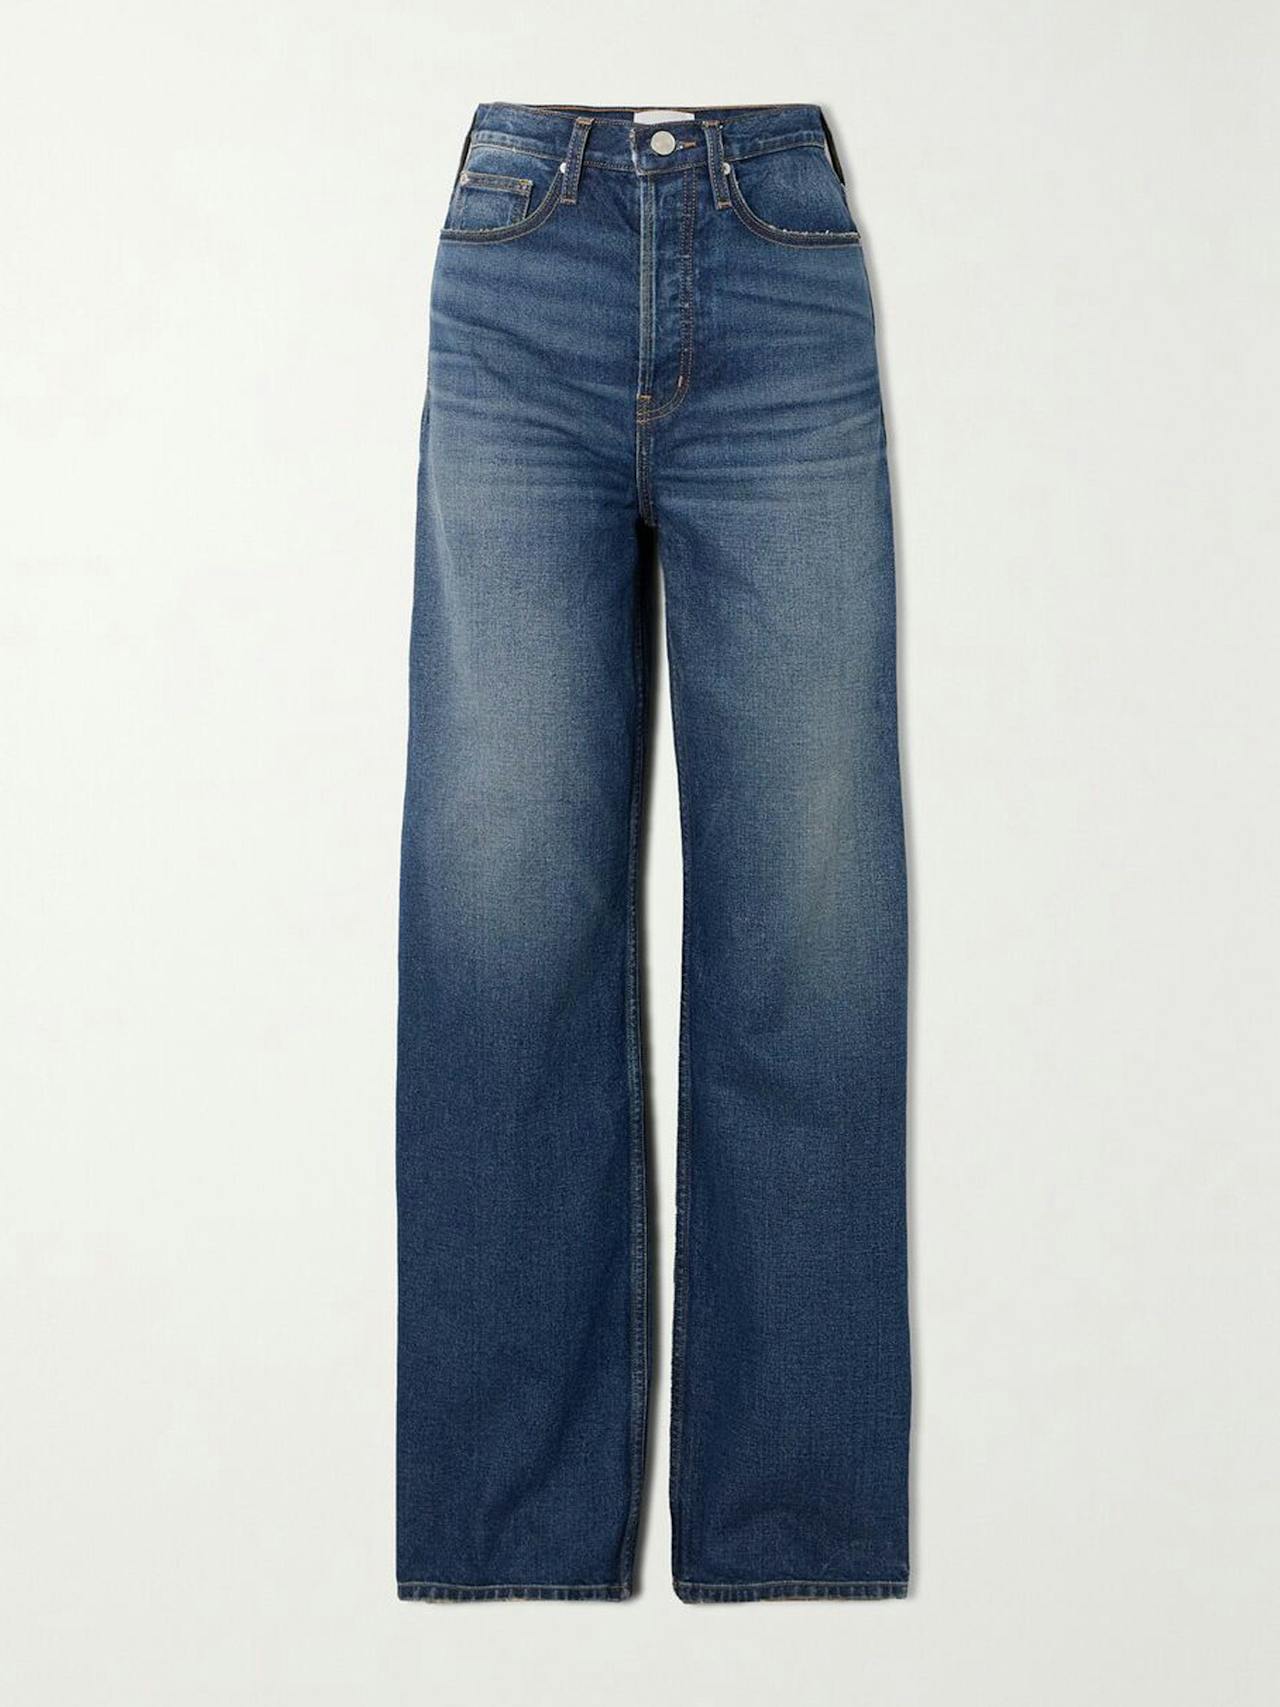 The 1978 high-rise straight-leg jeans